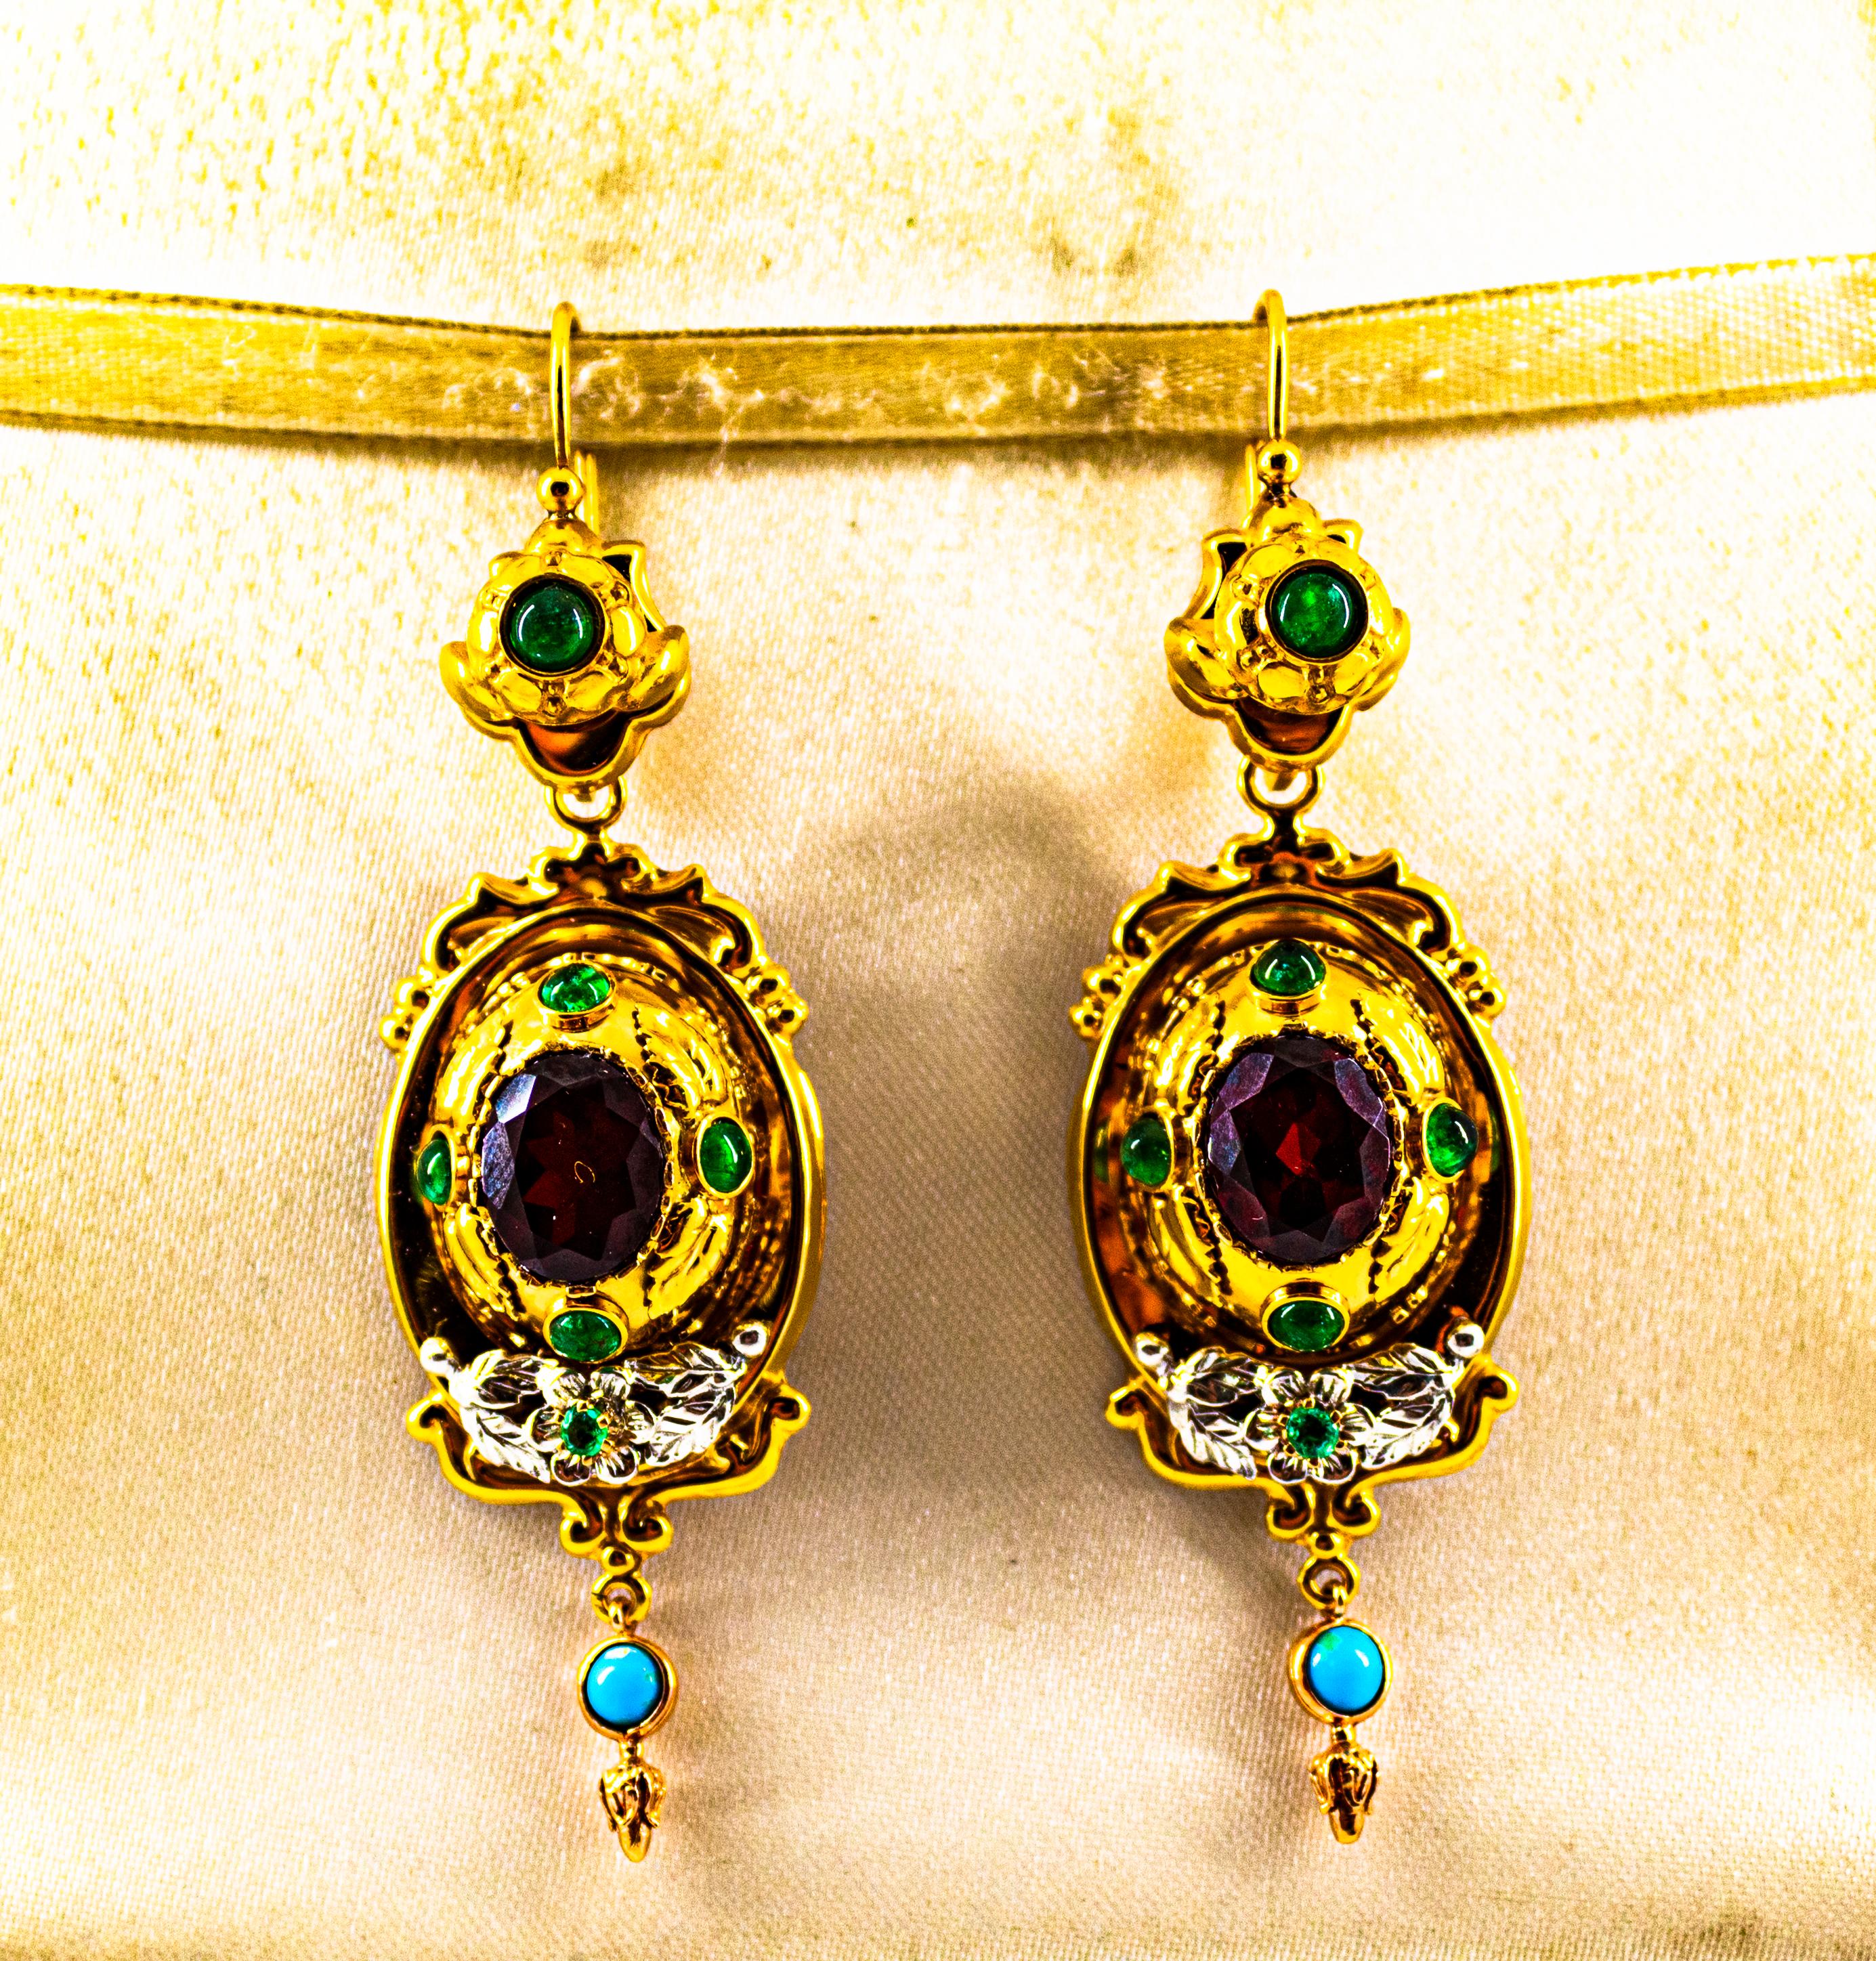 These Earrings are made of 9K Yellow Gold and Sterling Silver.
These Earrings have 1.80 Carats of Cabochon Cut Emeralds.
These Earrings have 4.00 Carats of Garnets.
These Earrings have Natural Turquoise.

These Earrings are inspired by Art